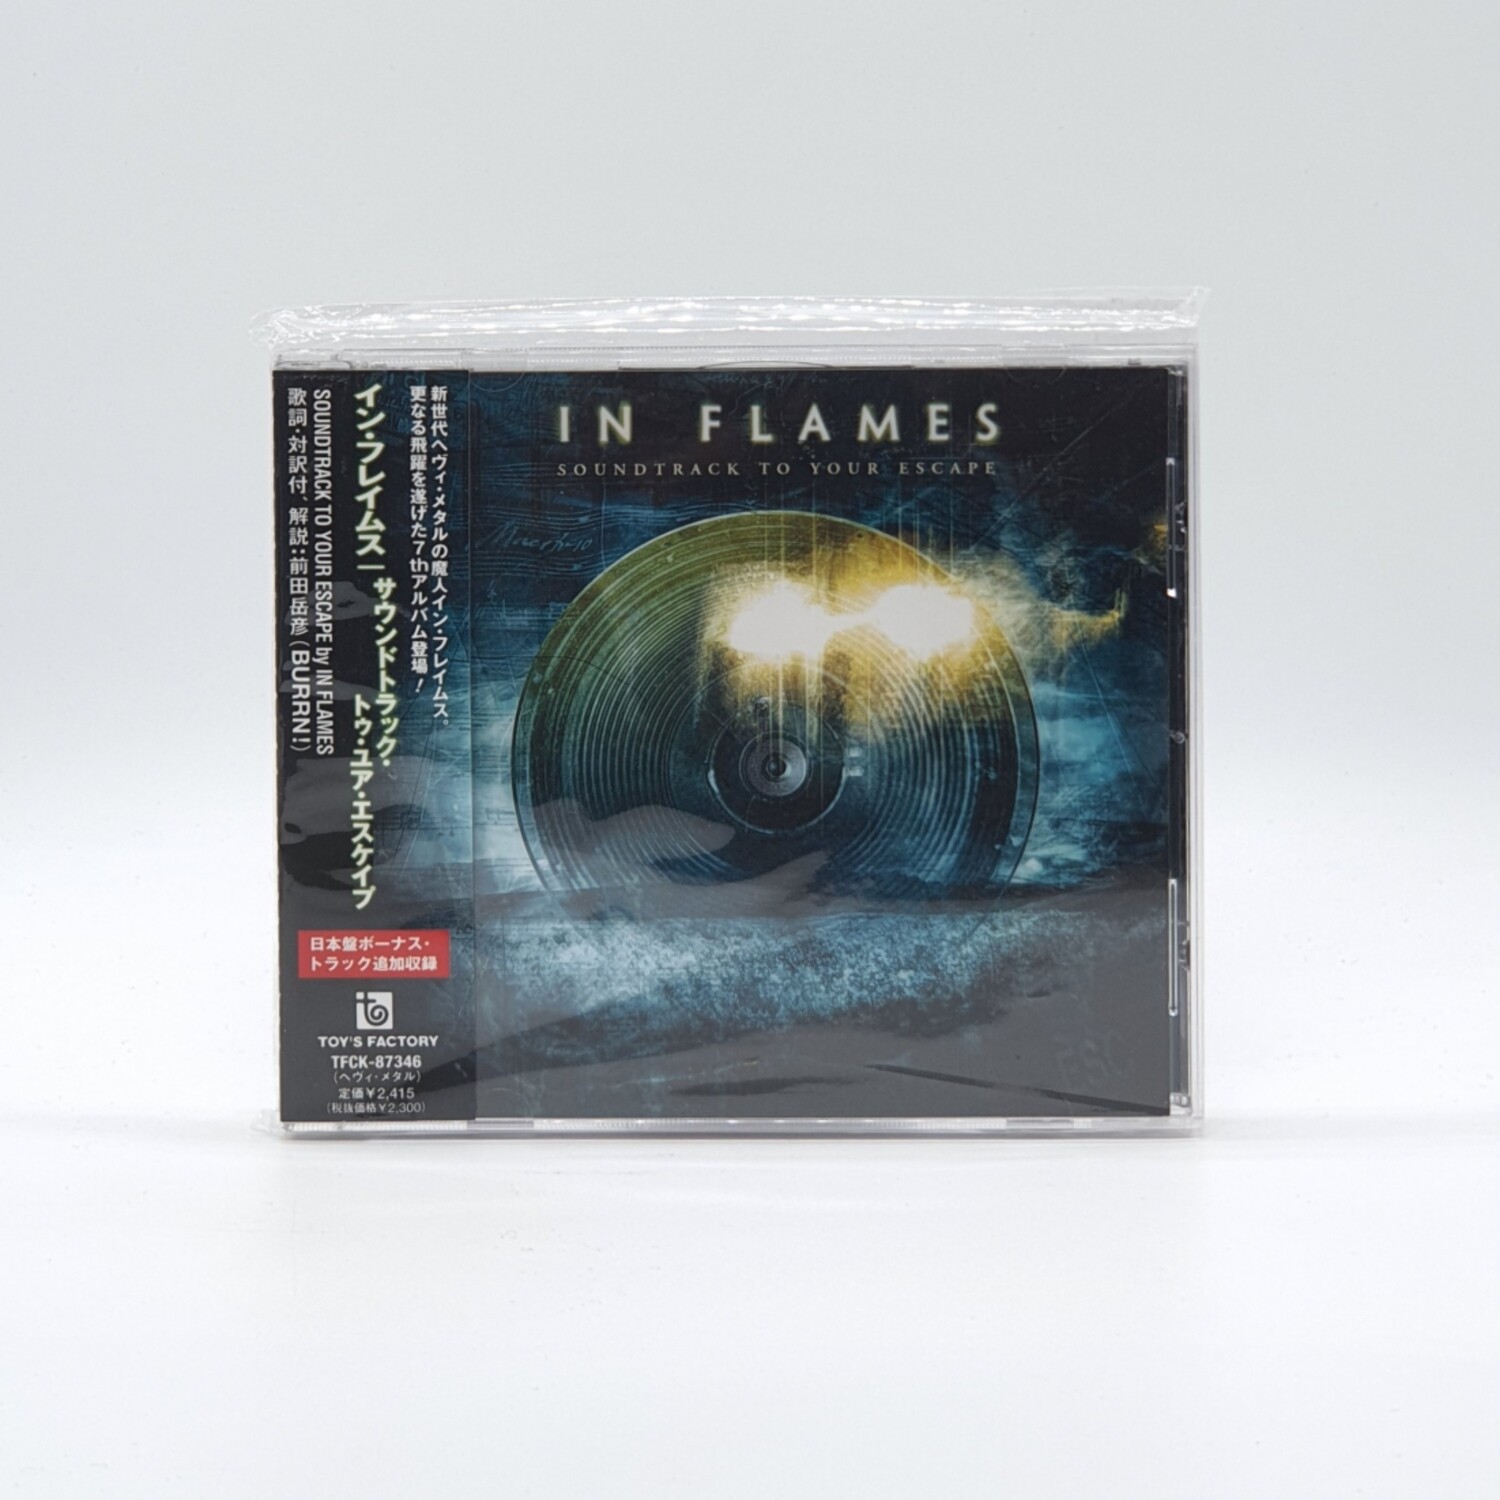 [USED] IN FLAMES -SOUNDTRACK TO YOUR ESCAPE- CD (JAPAN PRESS)